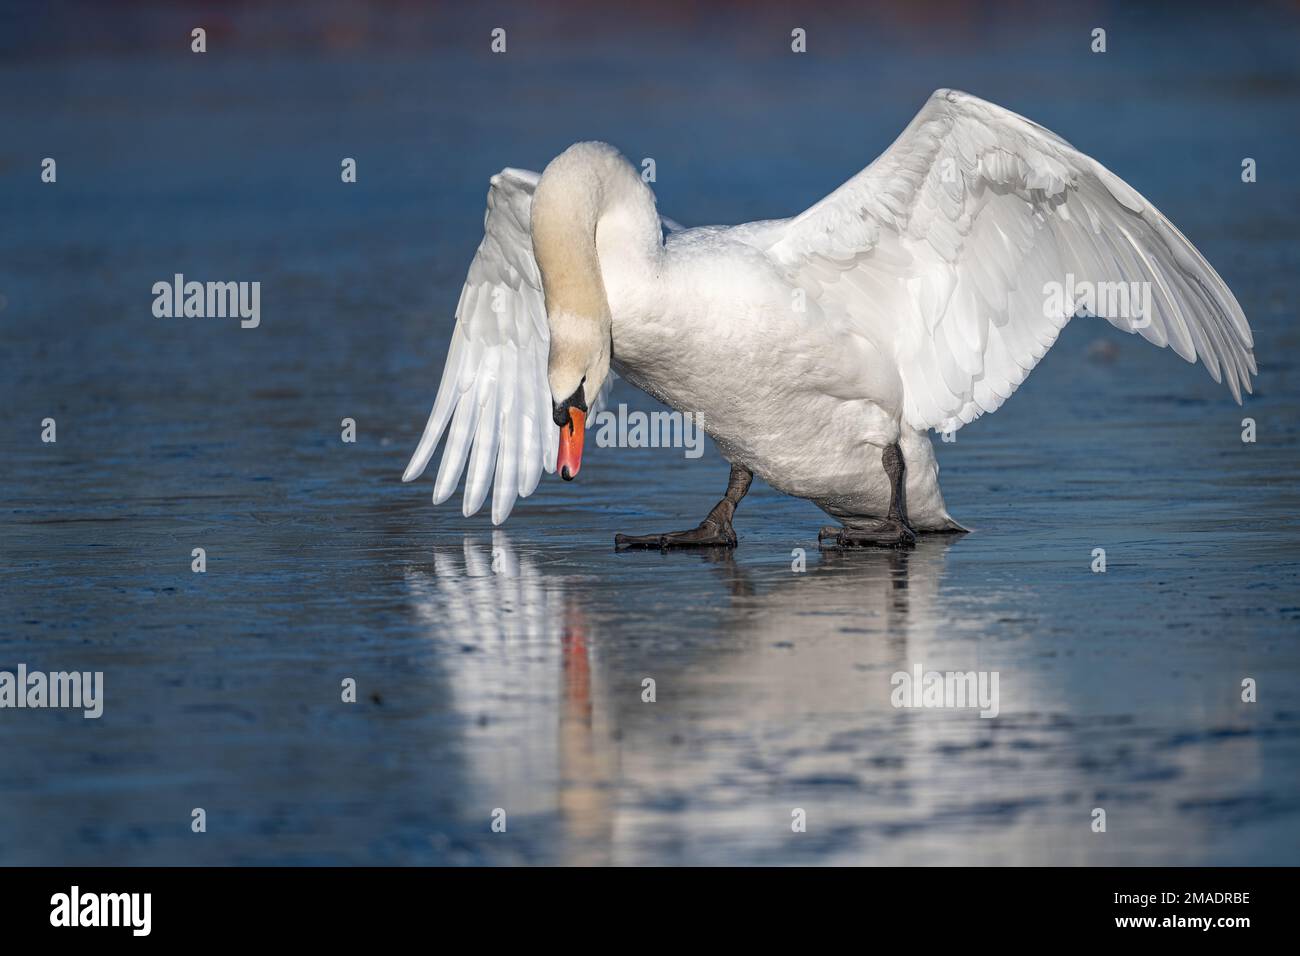 Male swan taking an aggressive posture on an icy pond when chasing another swan in his territory Stock Photo